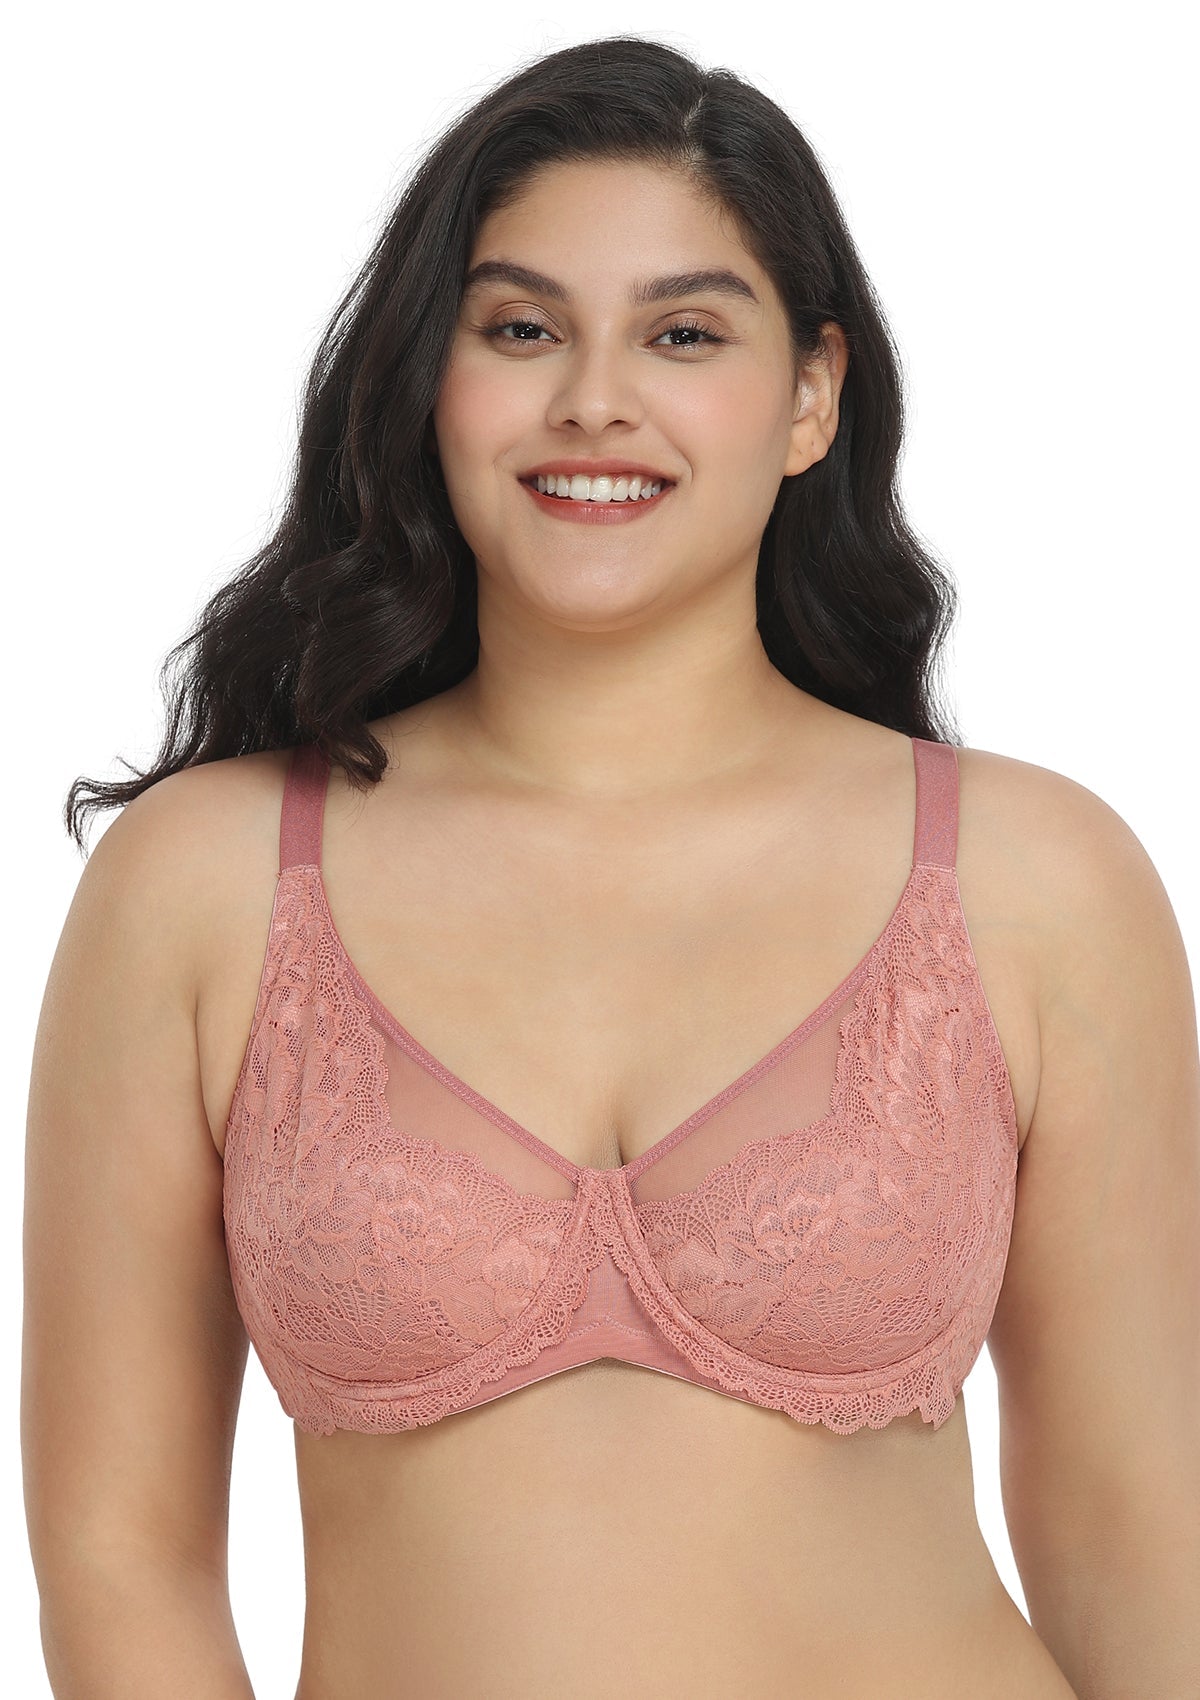 HSIA Paeonia Lace Full Coverage Underwire Non-Padded Uplifting Bra - Light Coral / 34 / C